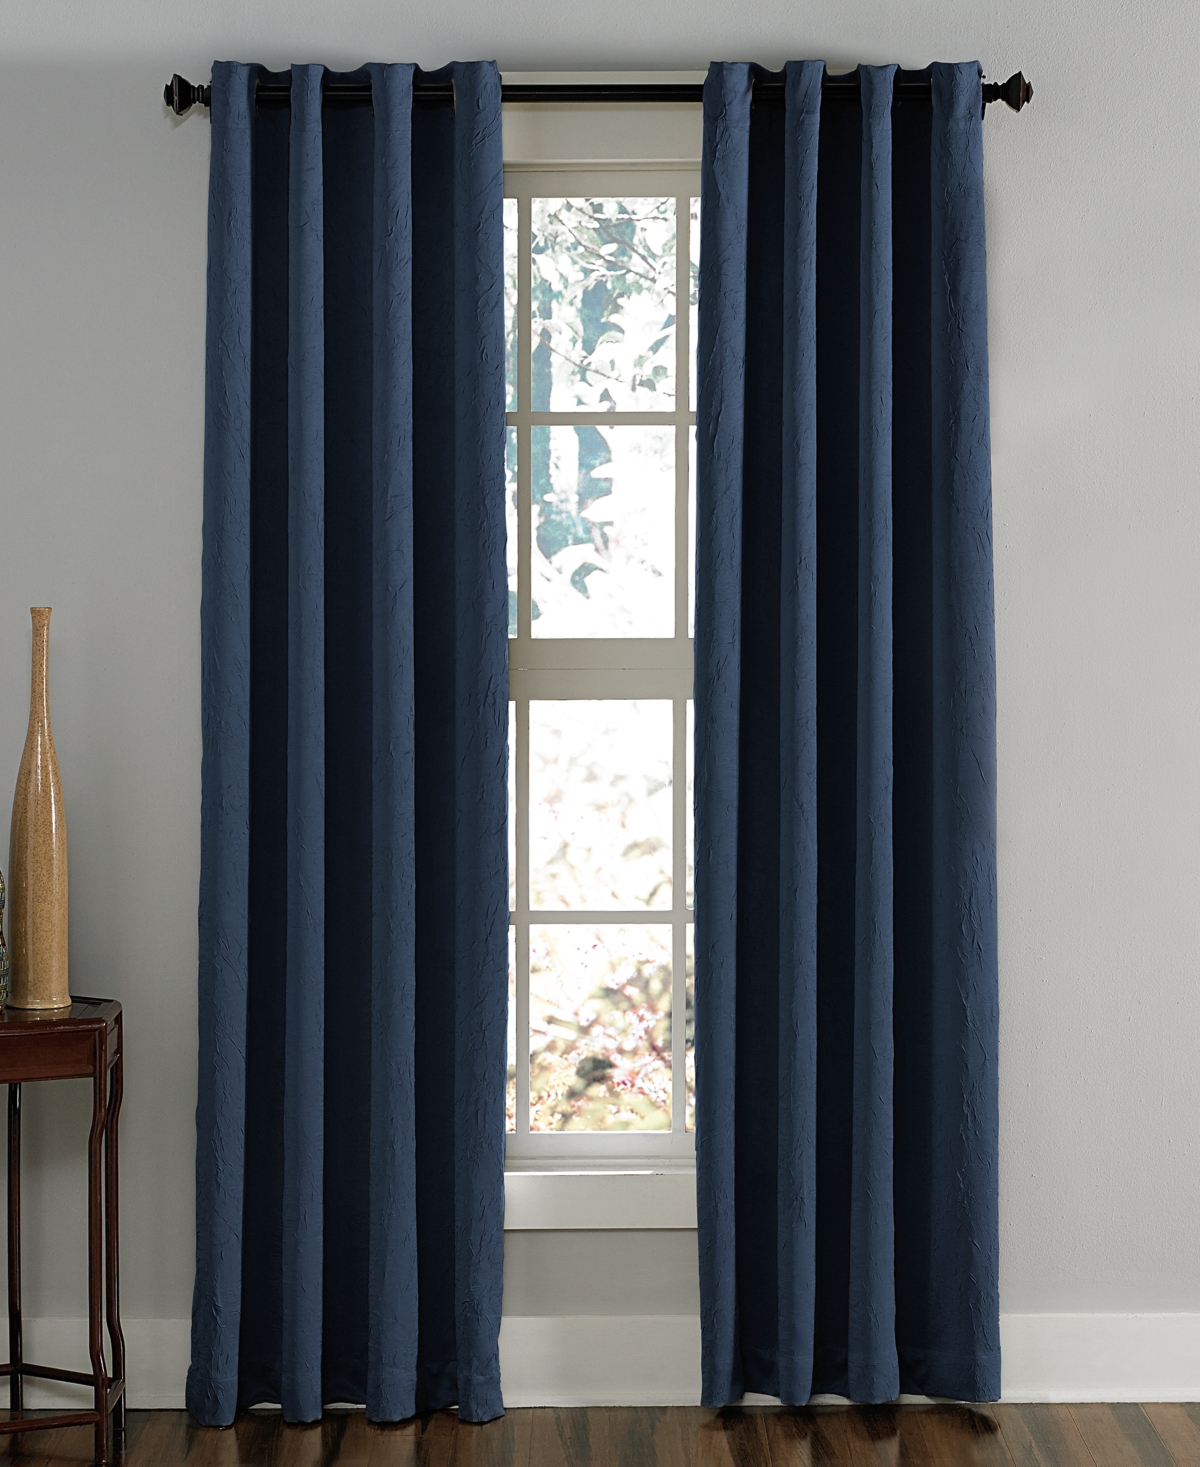 Chf Lenox 50" X 132" Crushed Texture Curtain Panel In Navy